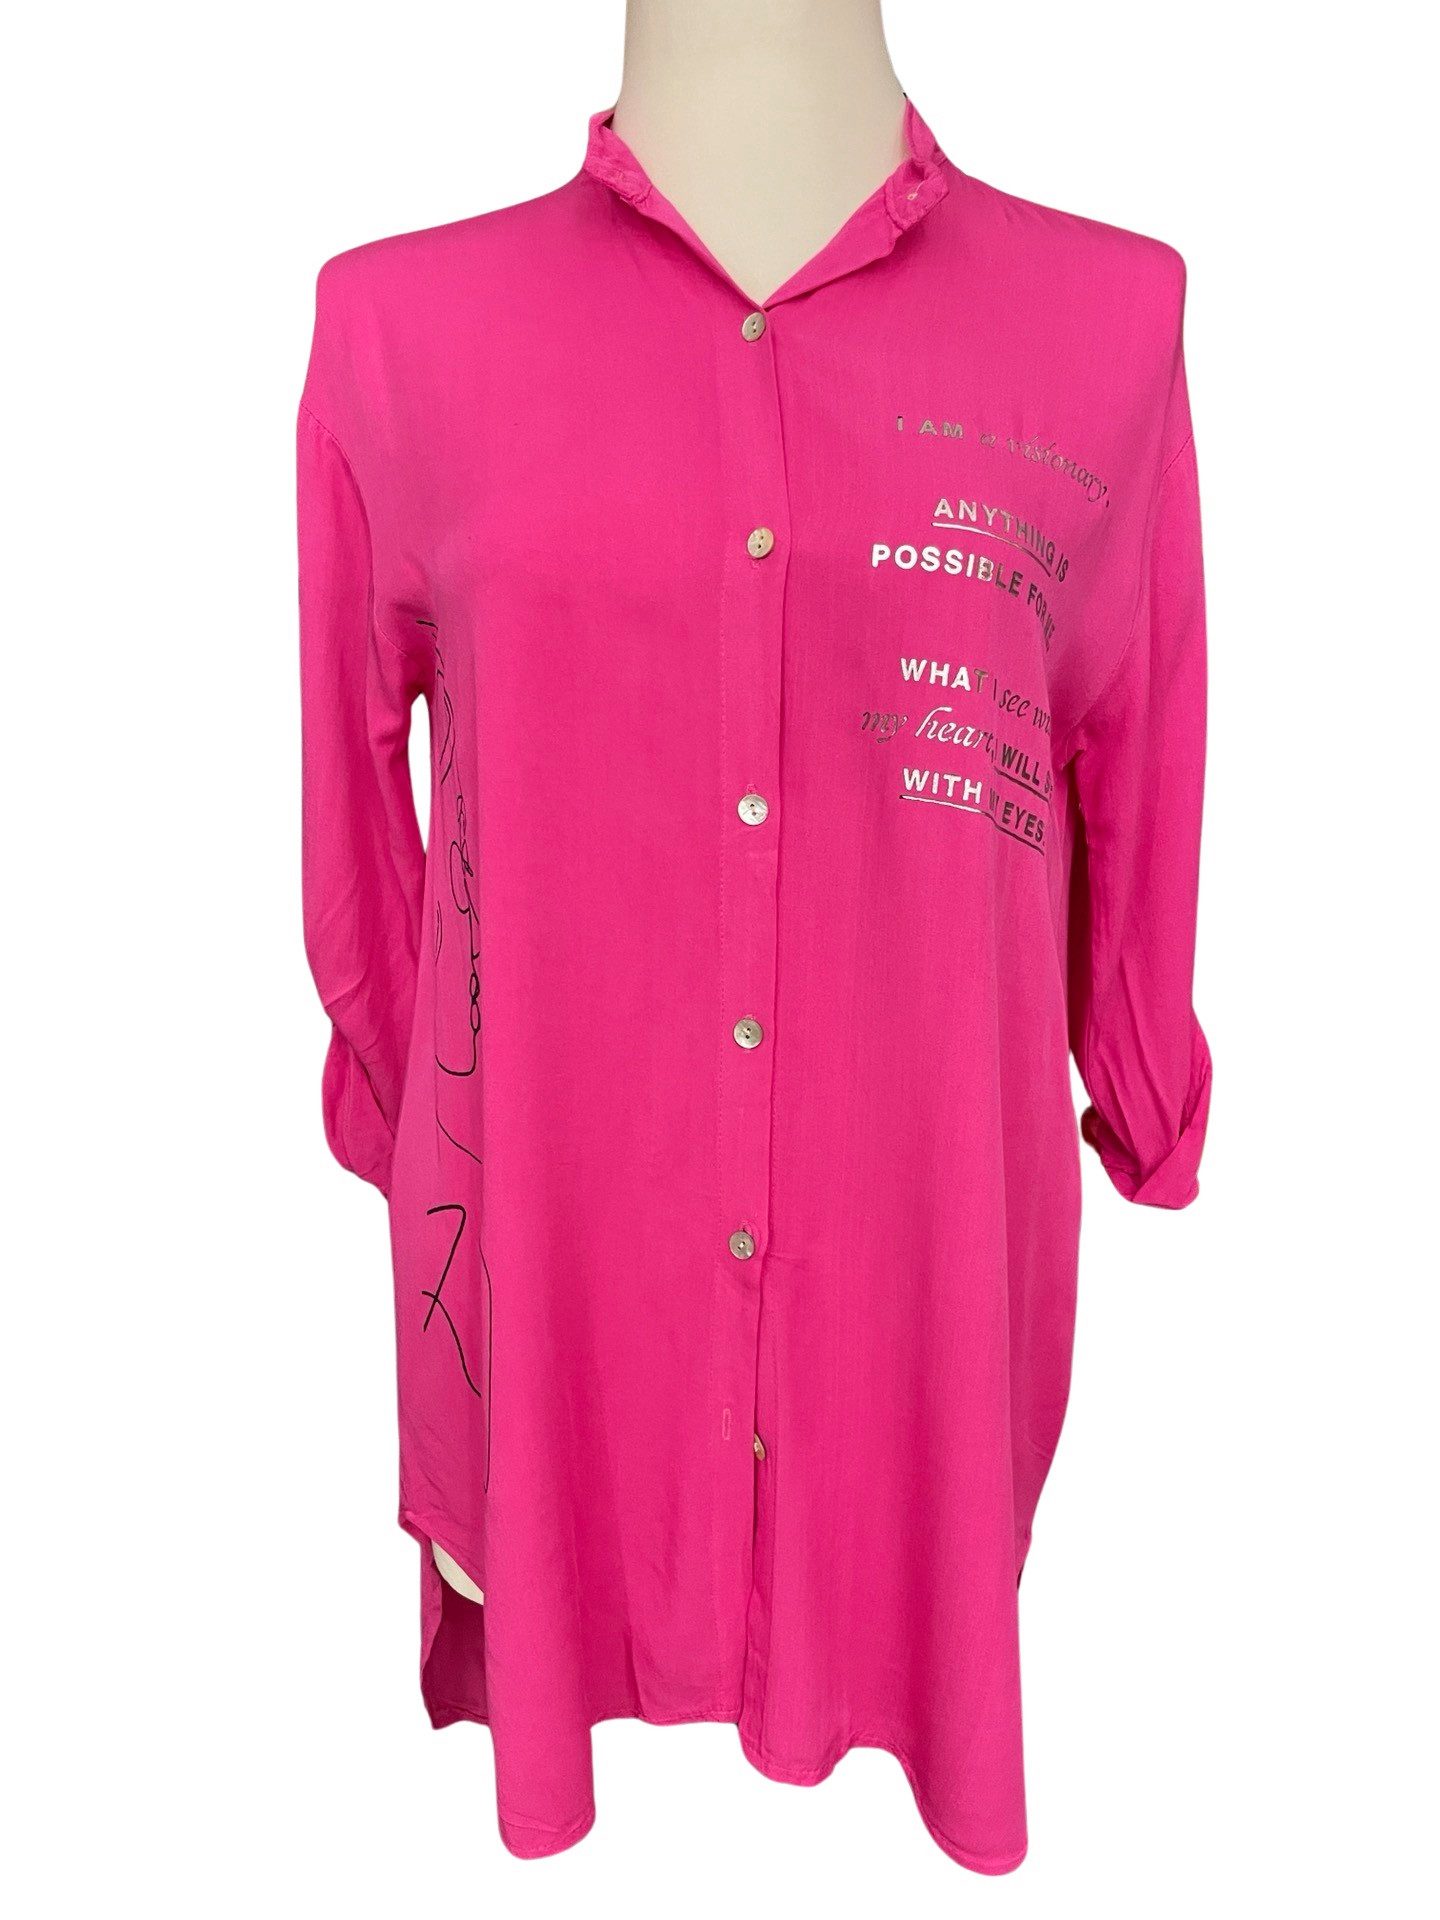 Fashion and Sports Longbluse FaS218 Longbluse Schrift pink AA ca. 55 cm